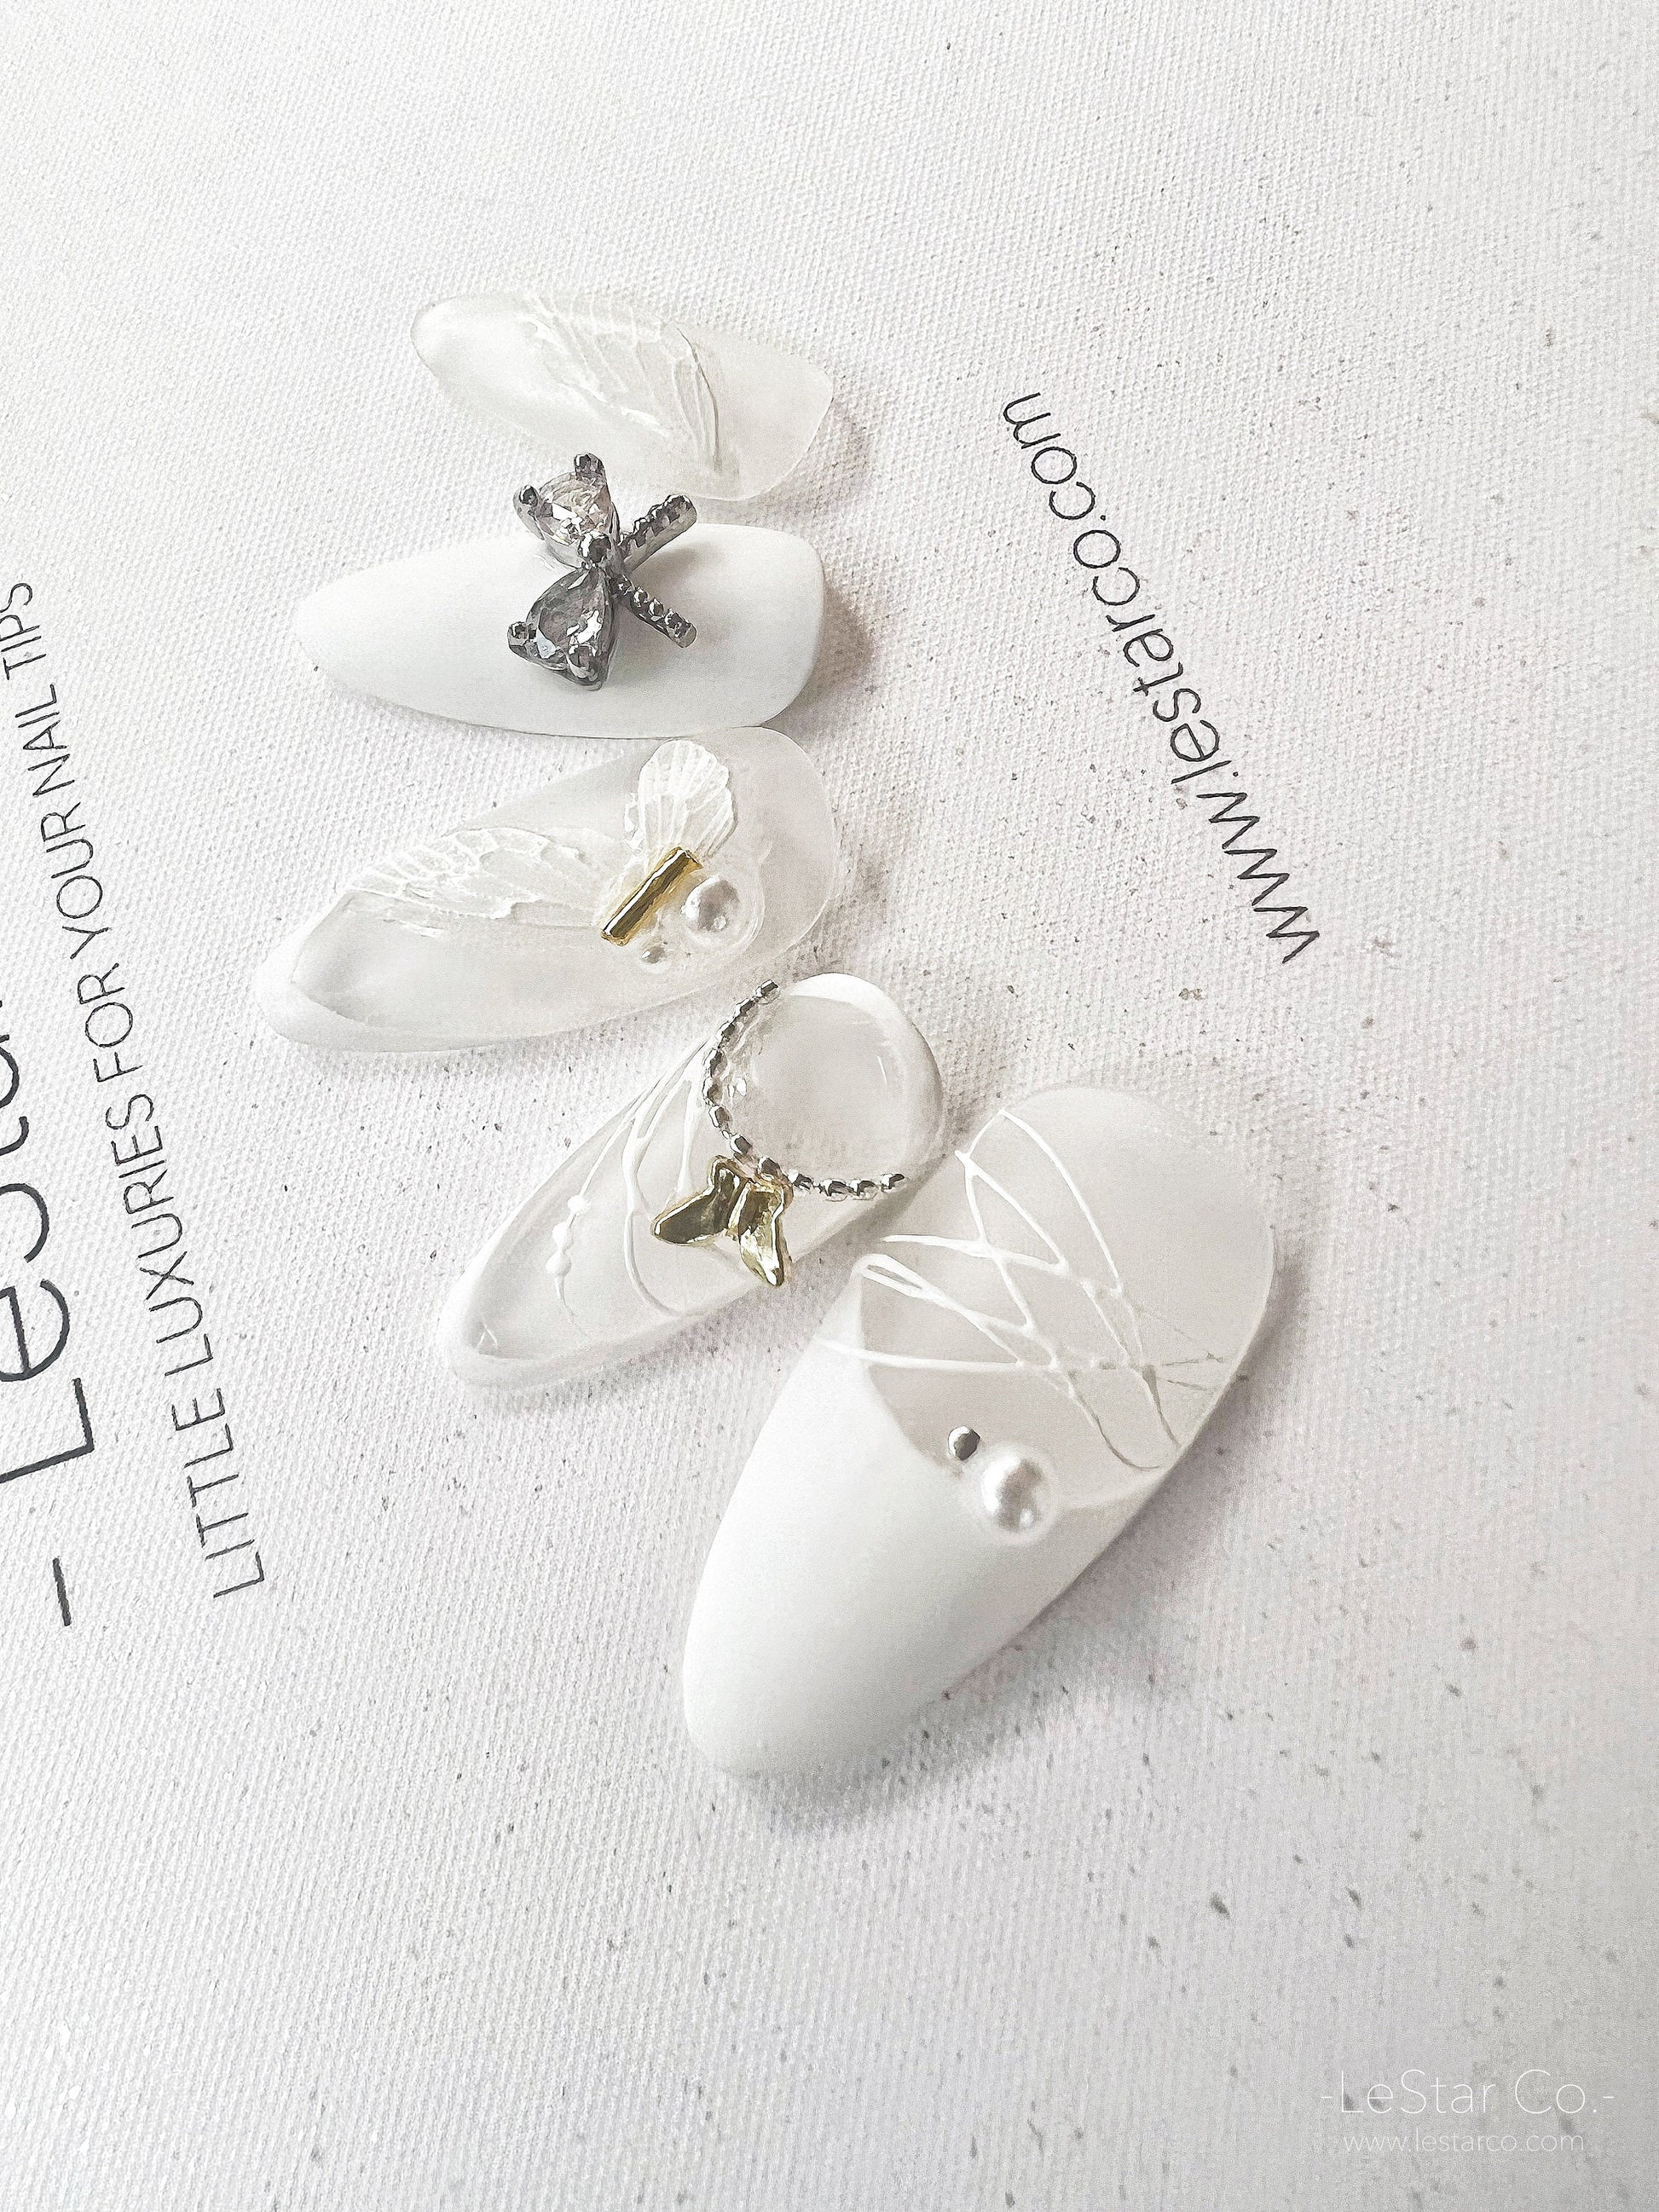 Reusable Butterfly Fairy | Premium Press on Nails Gel Manicure | Fake Nails | Handmade | Lestarco faux nails 151zz